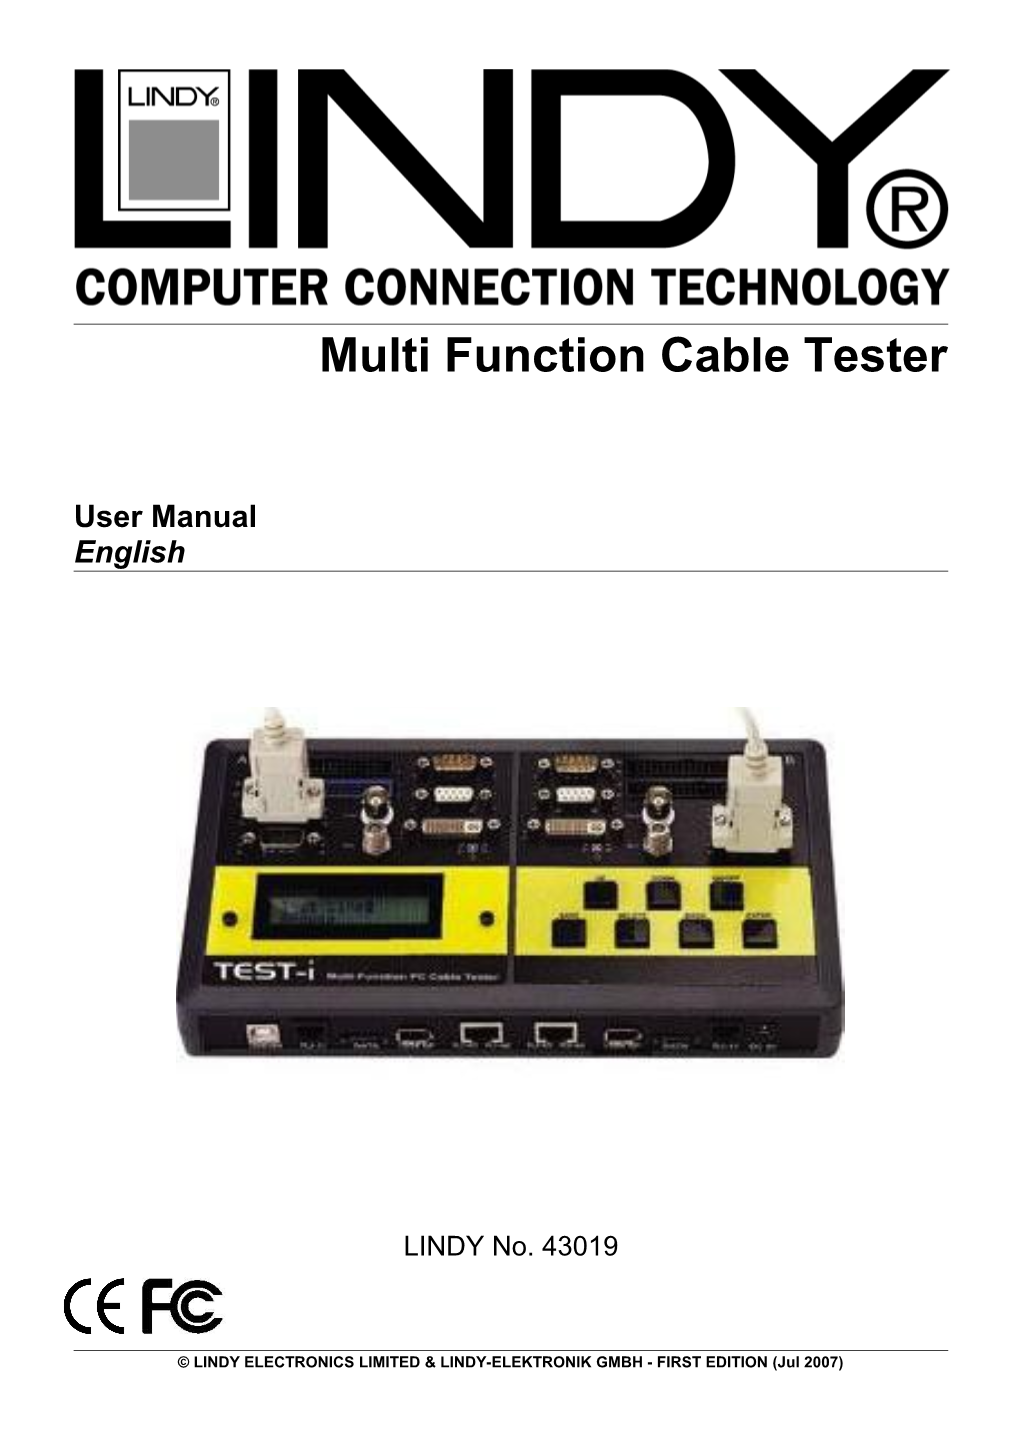 Multi Function Cable Tester User Manual